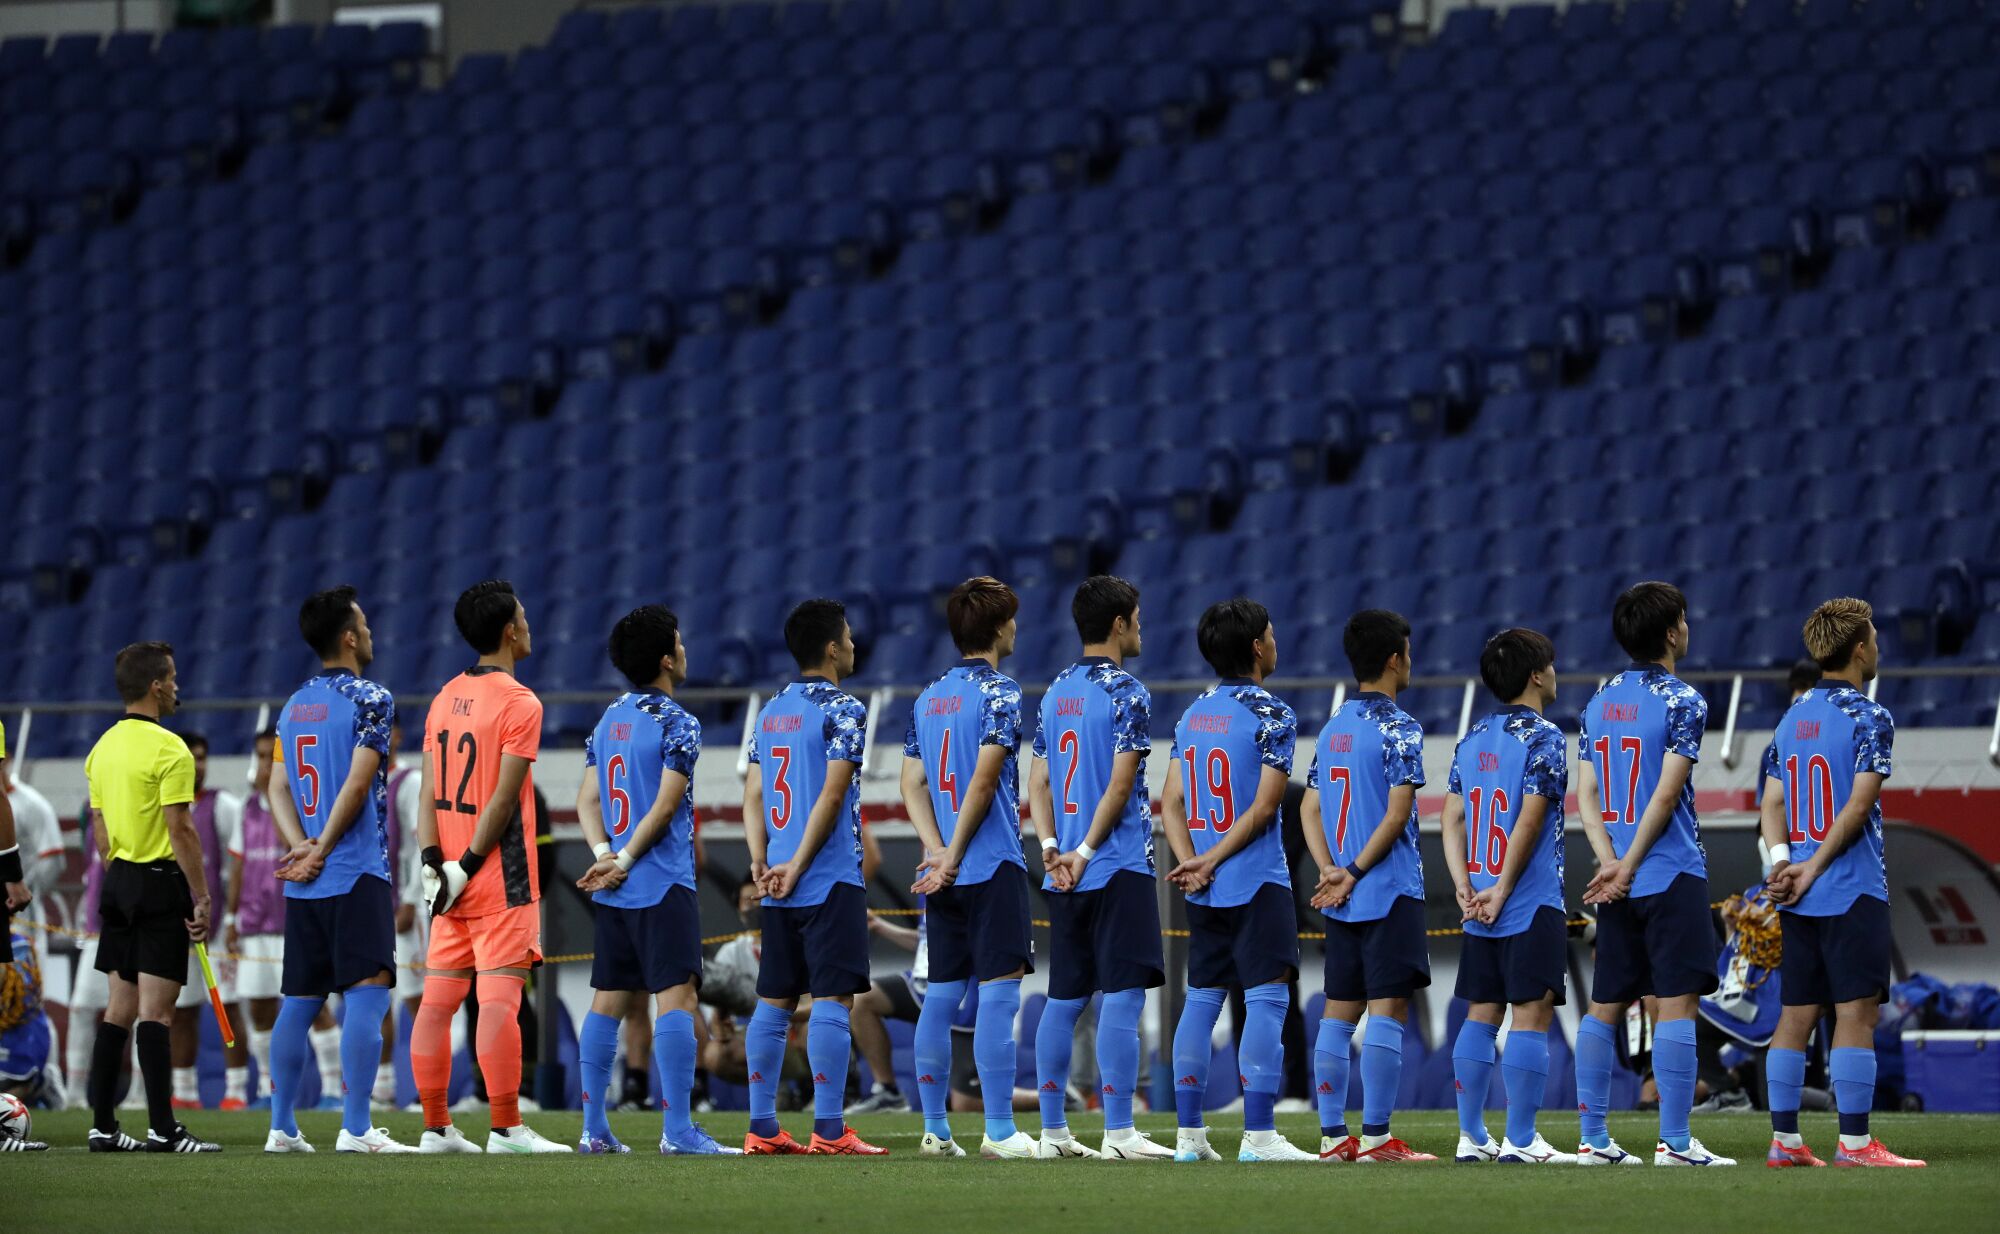 Soccer players stand in a line, hands clasped behind their backs, facing rows of empty stadium seats.